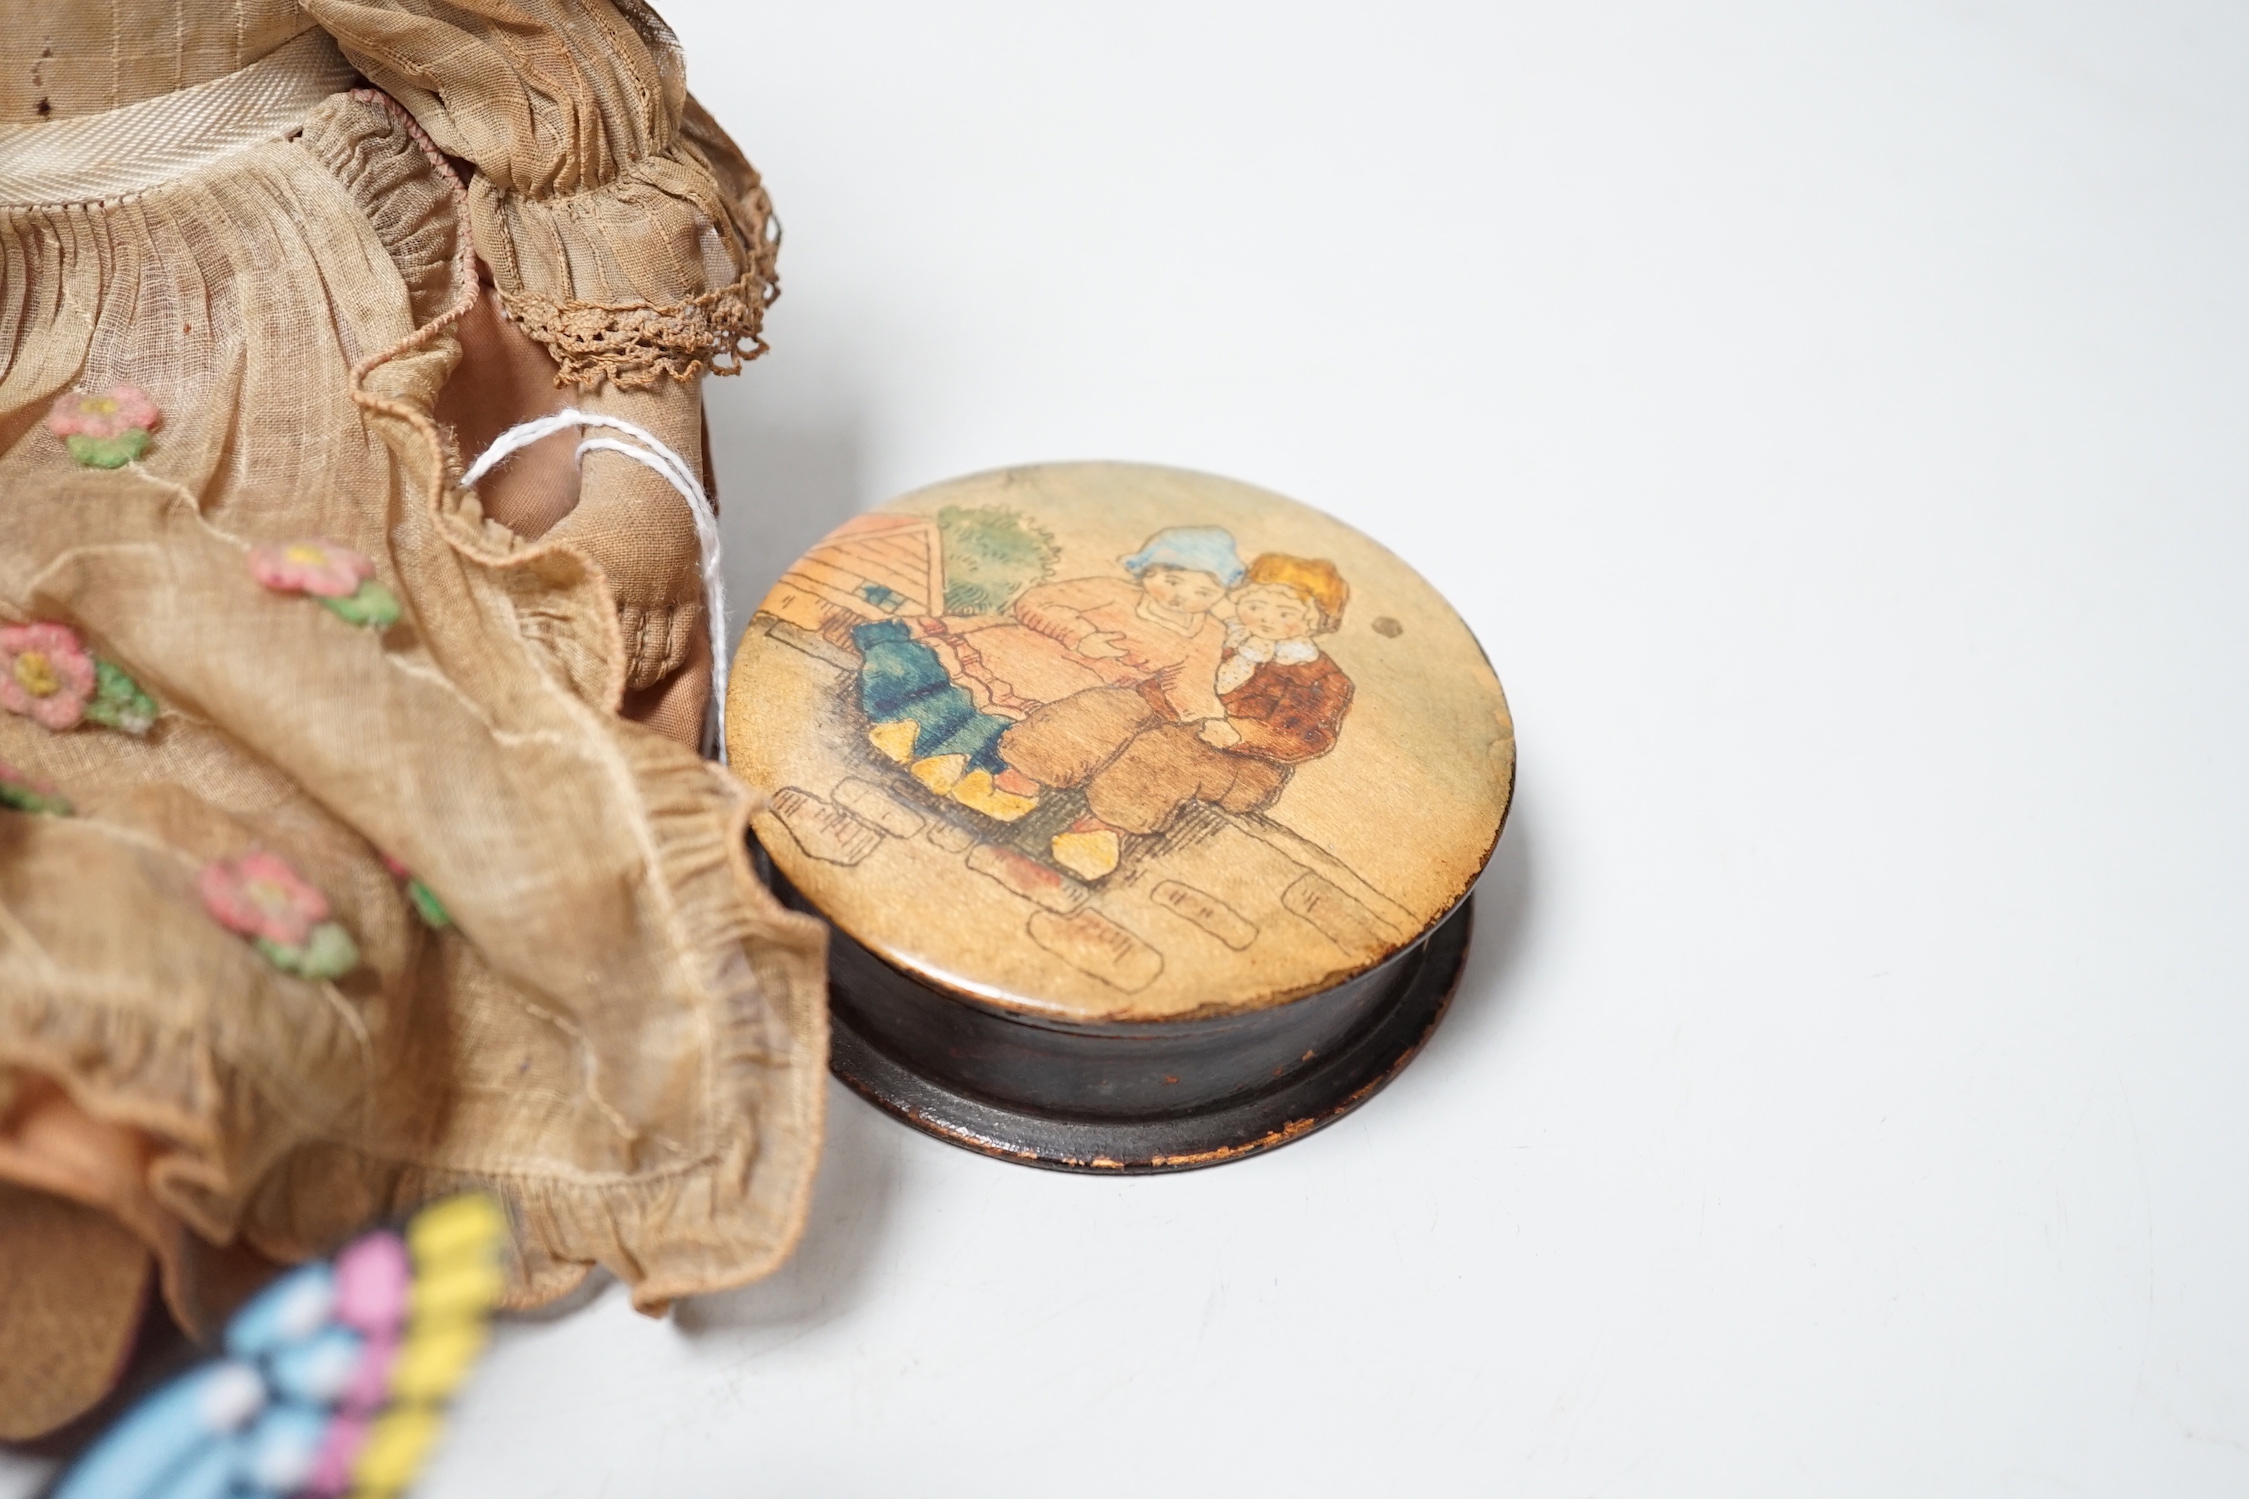 Two tin plate clockwork toys, a doll and a treen box